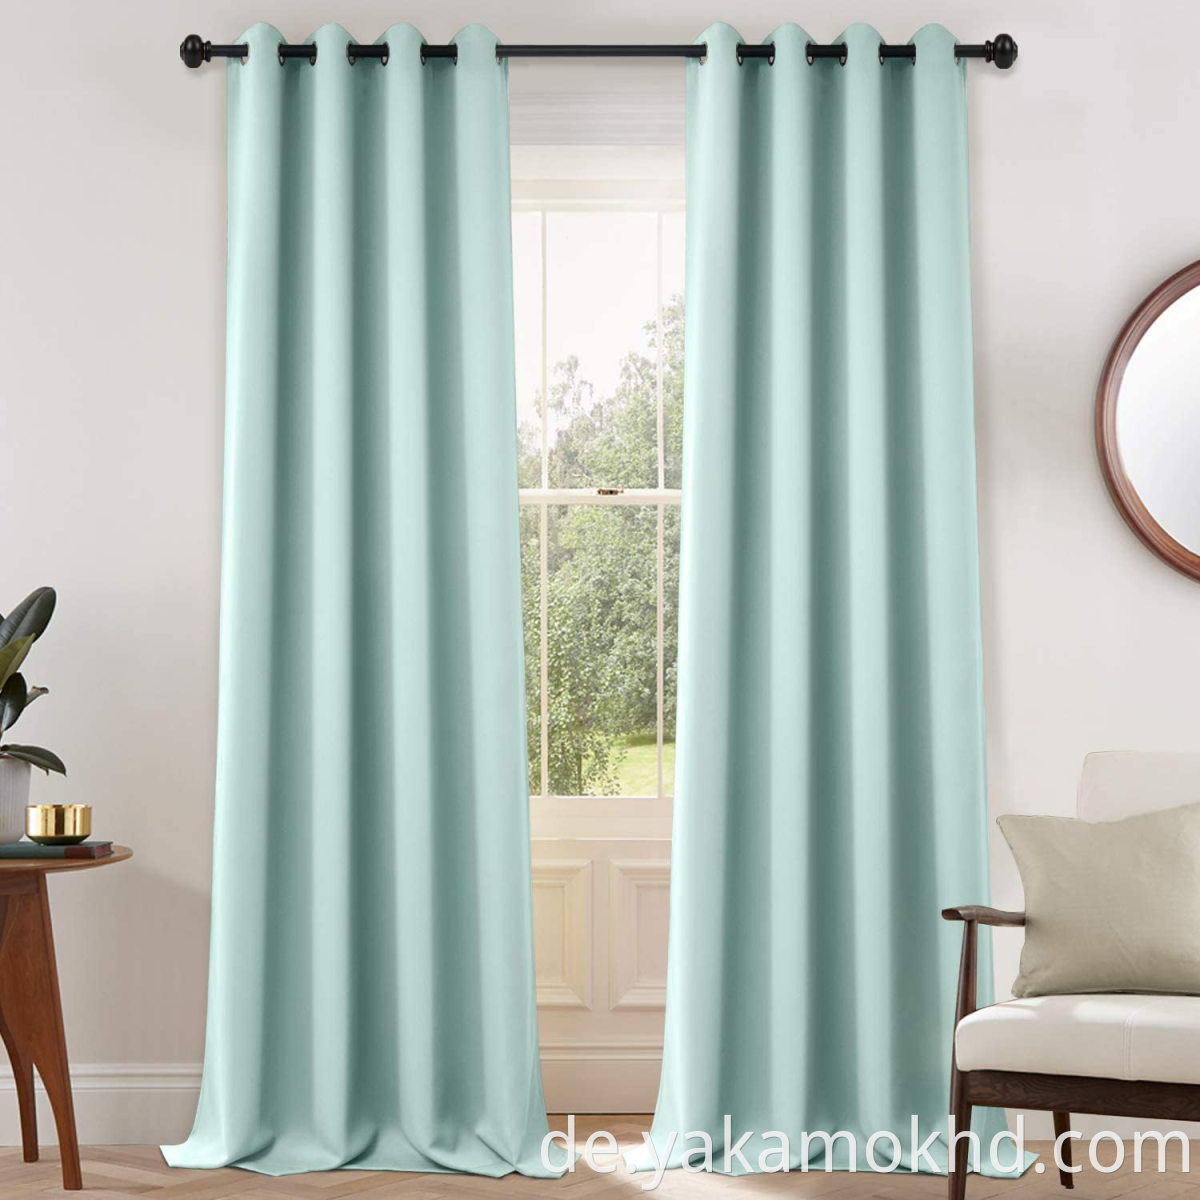 Curtains 108 Inch Long